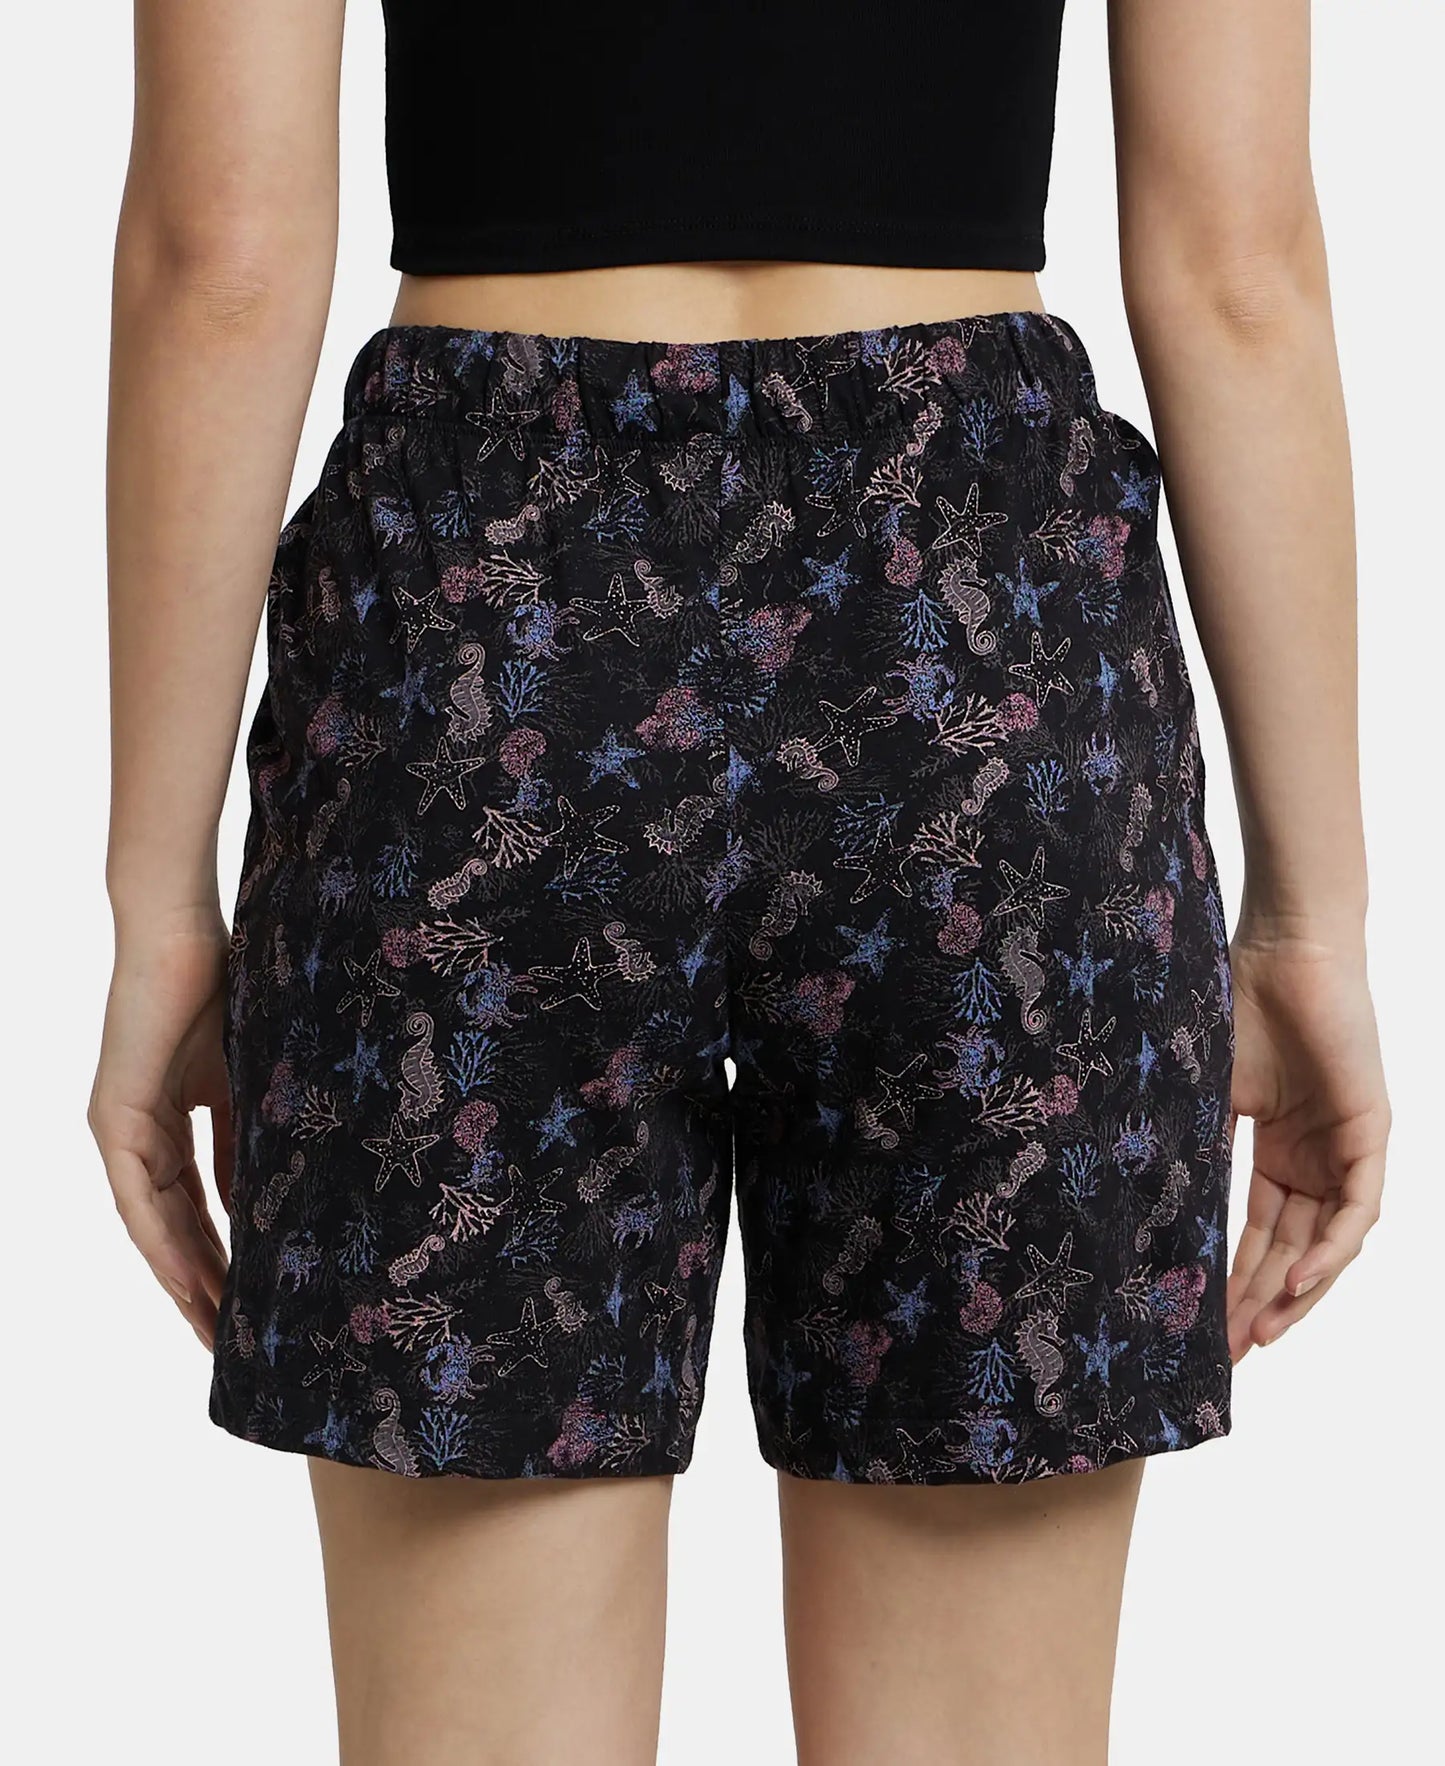 Super Combed Cotton Relaxed Fit Printed Shorts with Convenient Side Pockets - Black-3